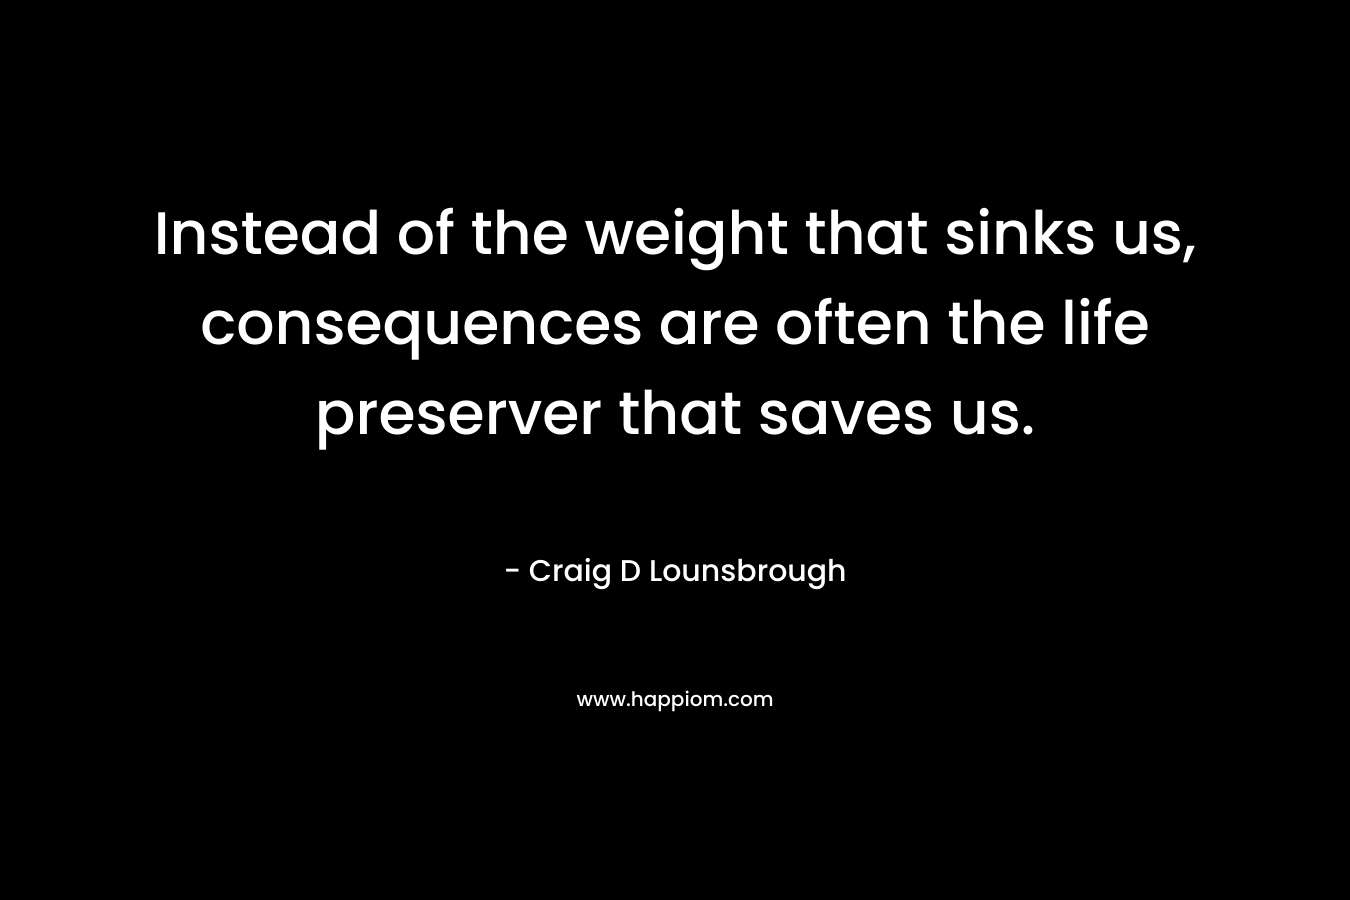 Instead of the weight that sinks us, consequences are often the life preserver that saves us. – Craig D Lounsbrough